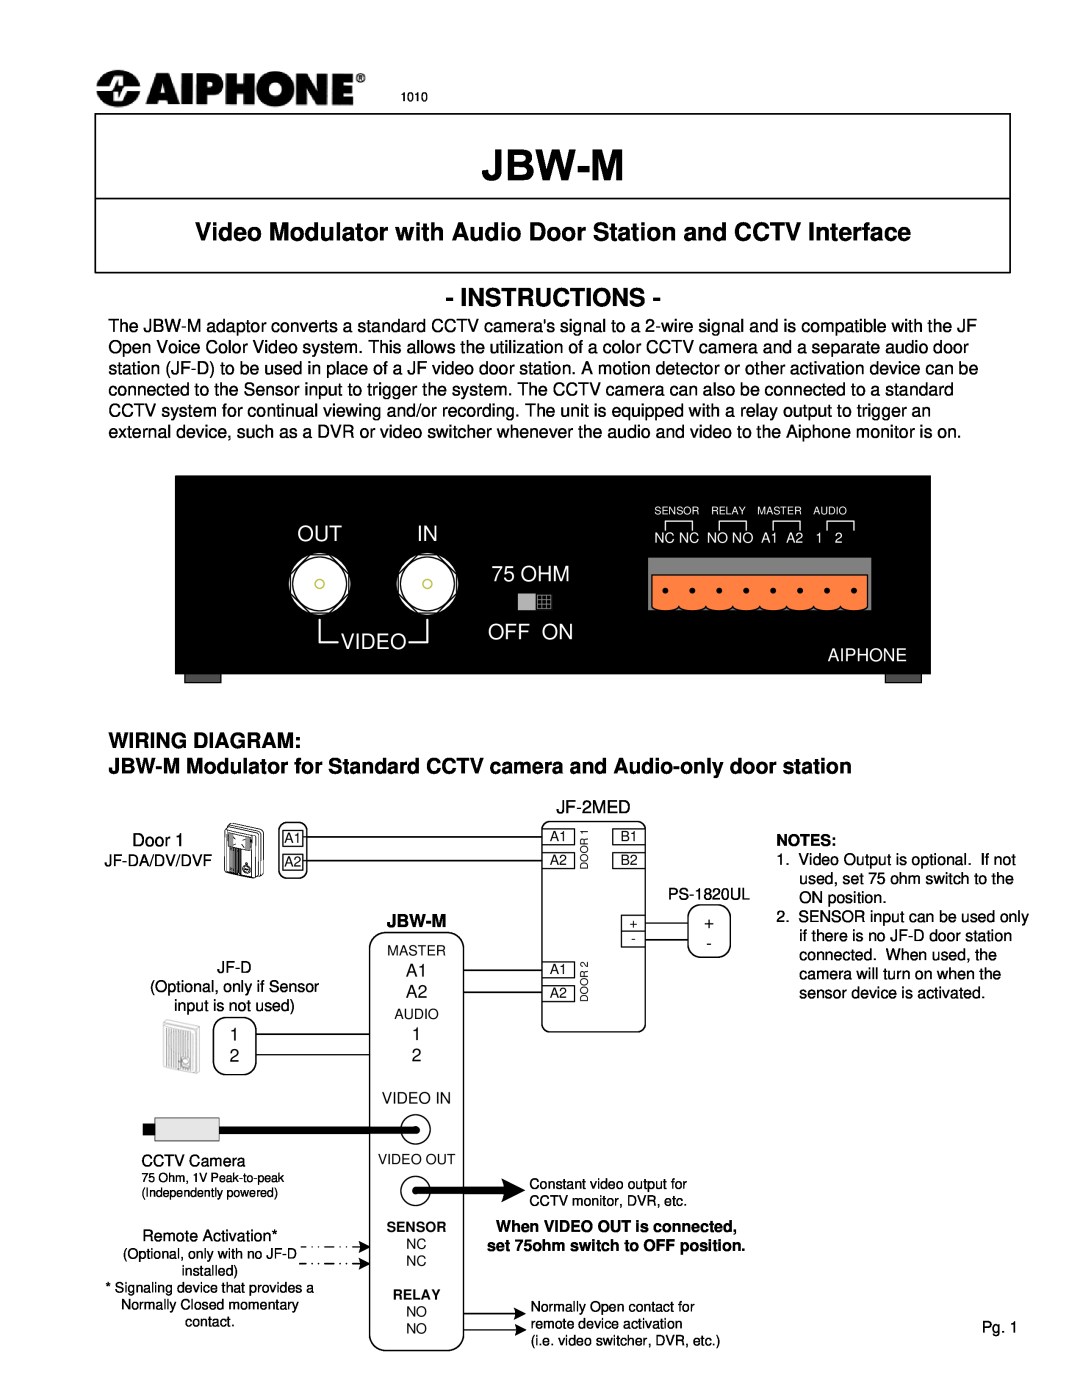 Aiphone manual Wiring Diagram, JBW-M Modulator for Standard CCTV camera and Audio-only door station, Jbw-M, 75 OHM 